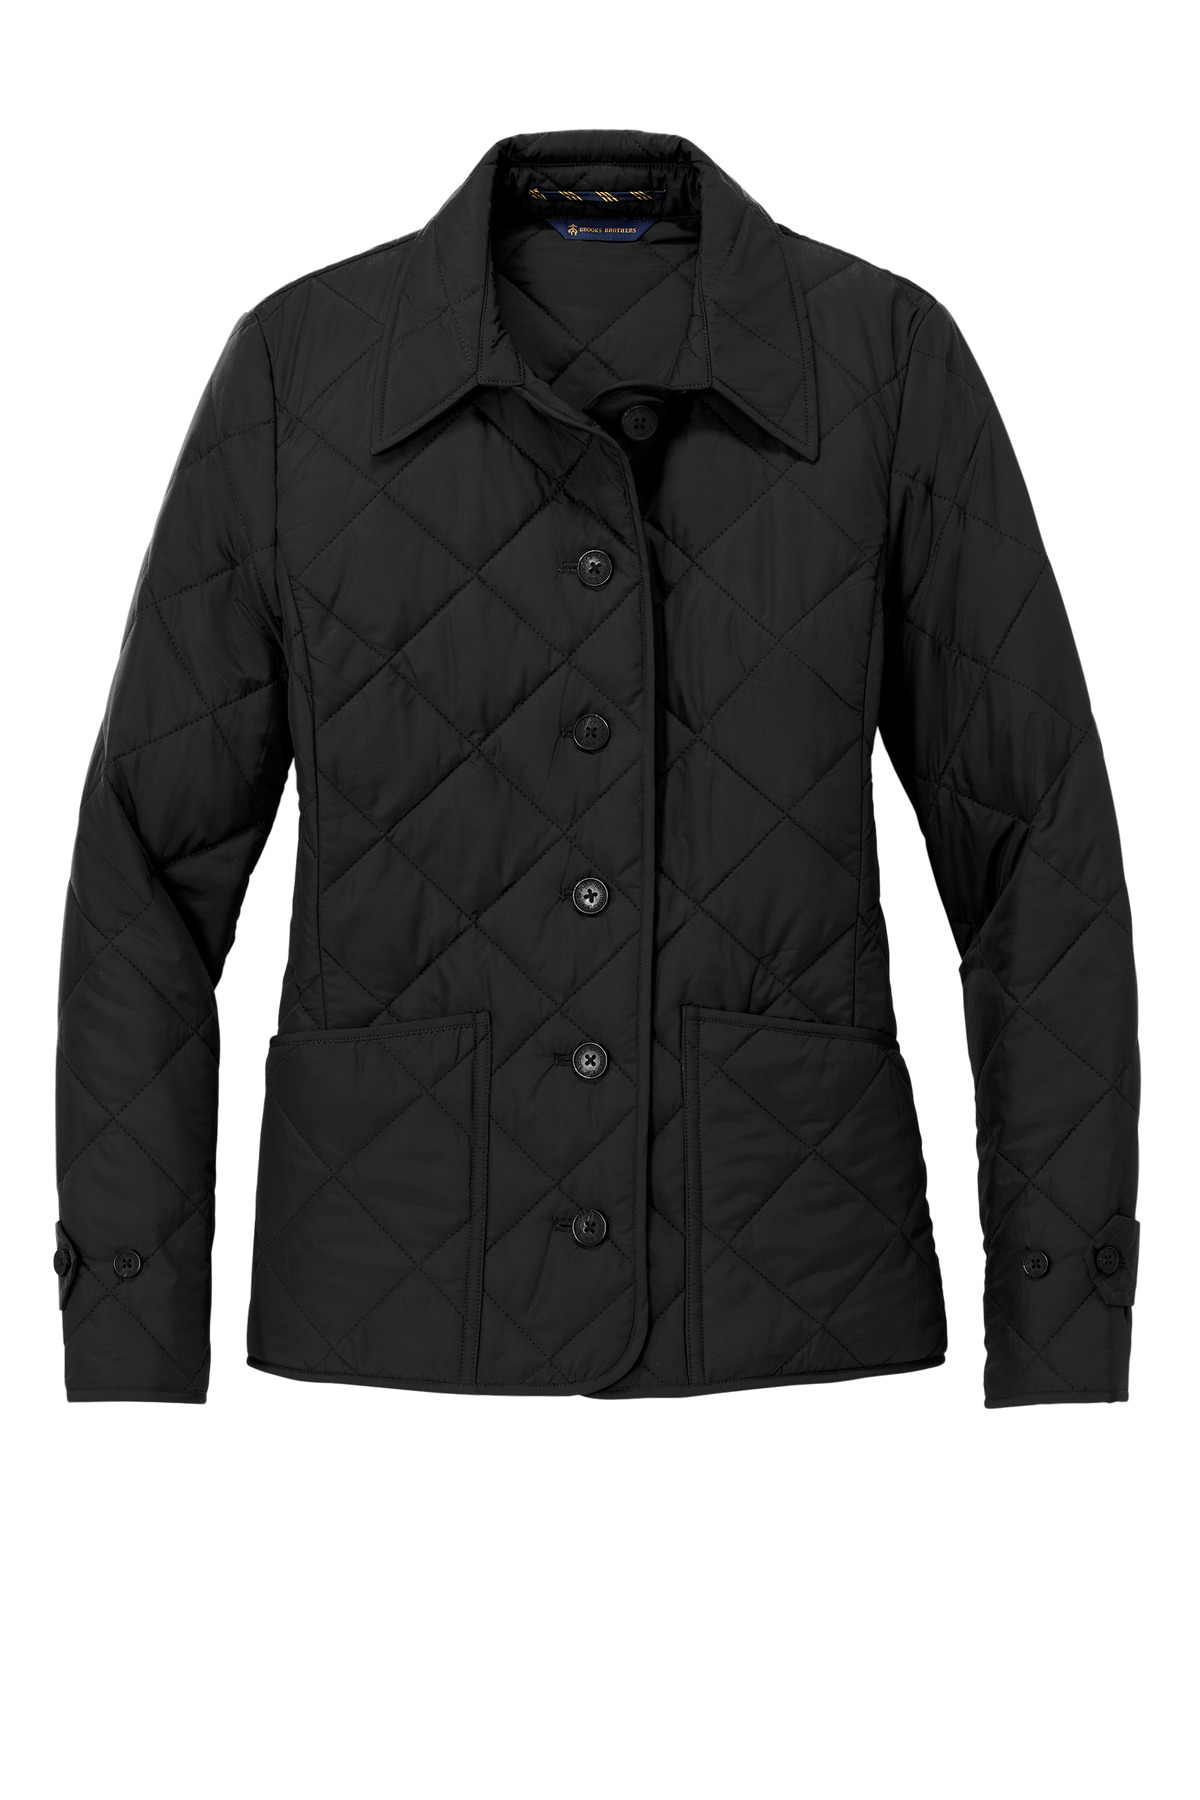 Brooks Brothers Womens Quilted Jacket BB18601